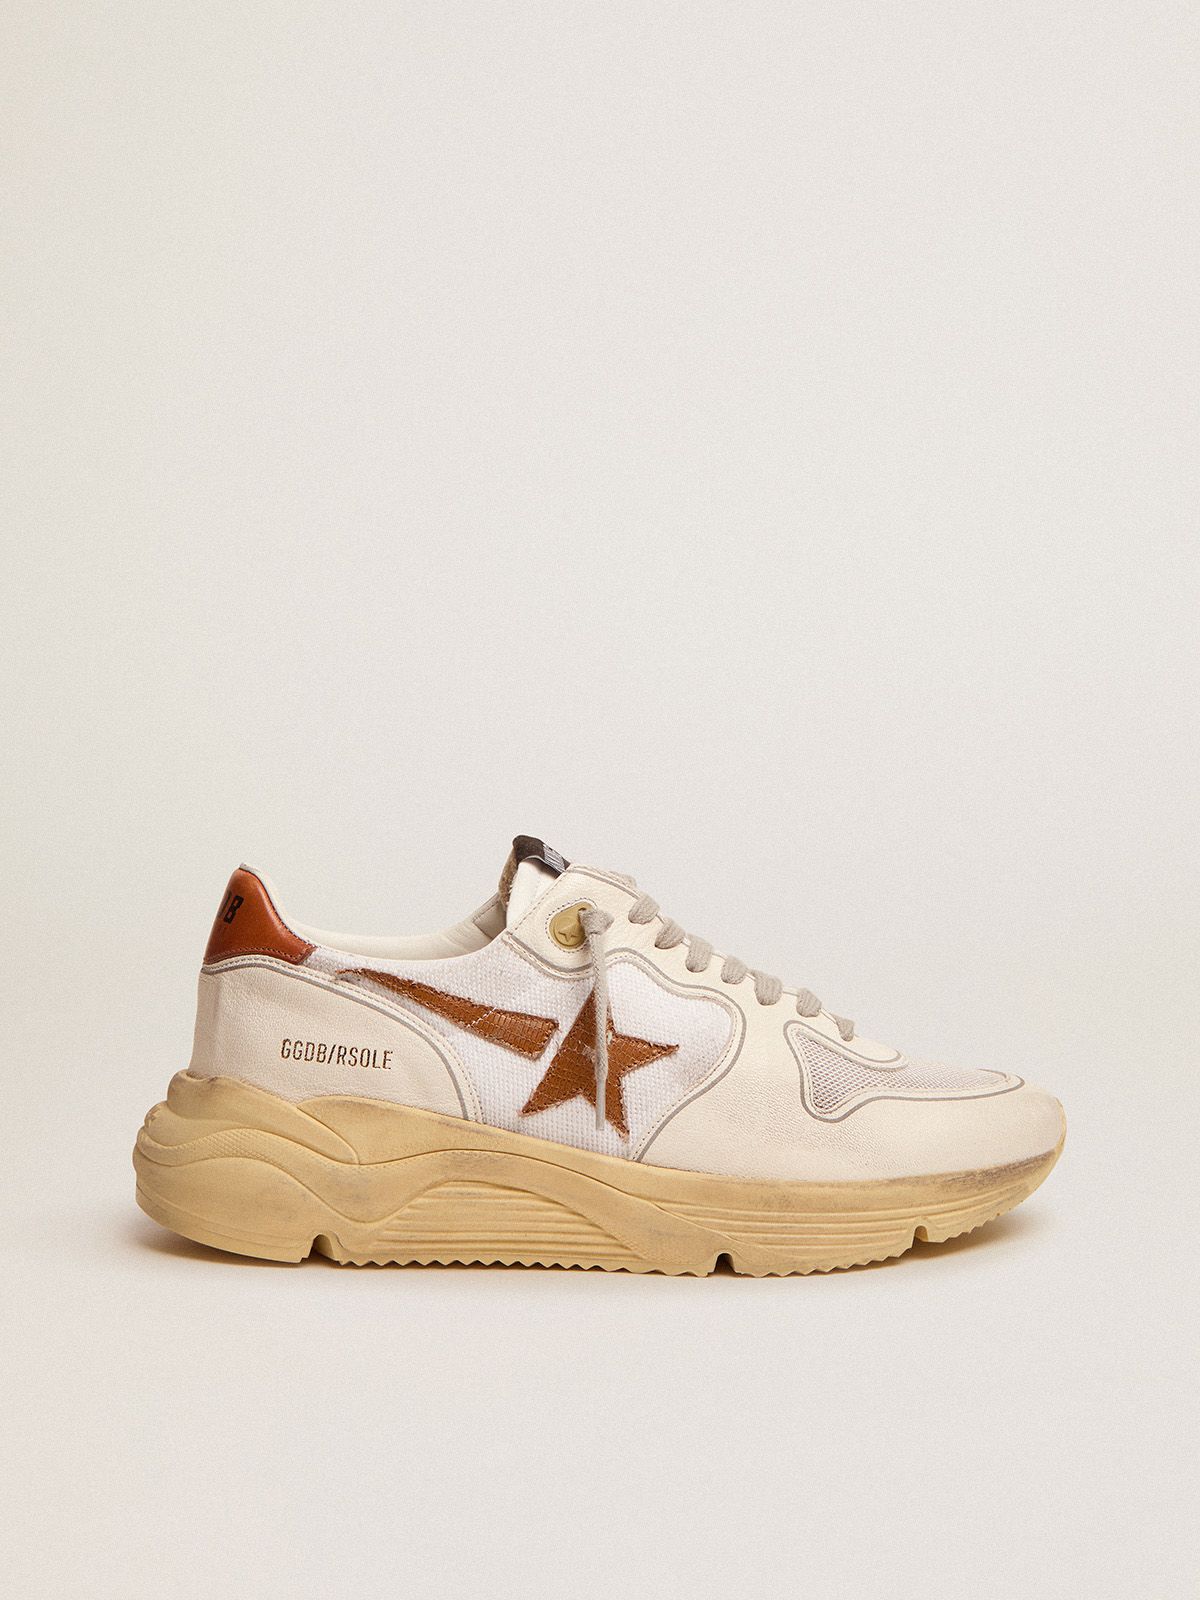 golden goose Sole lizard-print heel and with star brown sneakers tab Running tan LTD leather